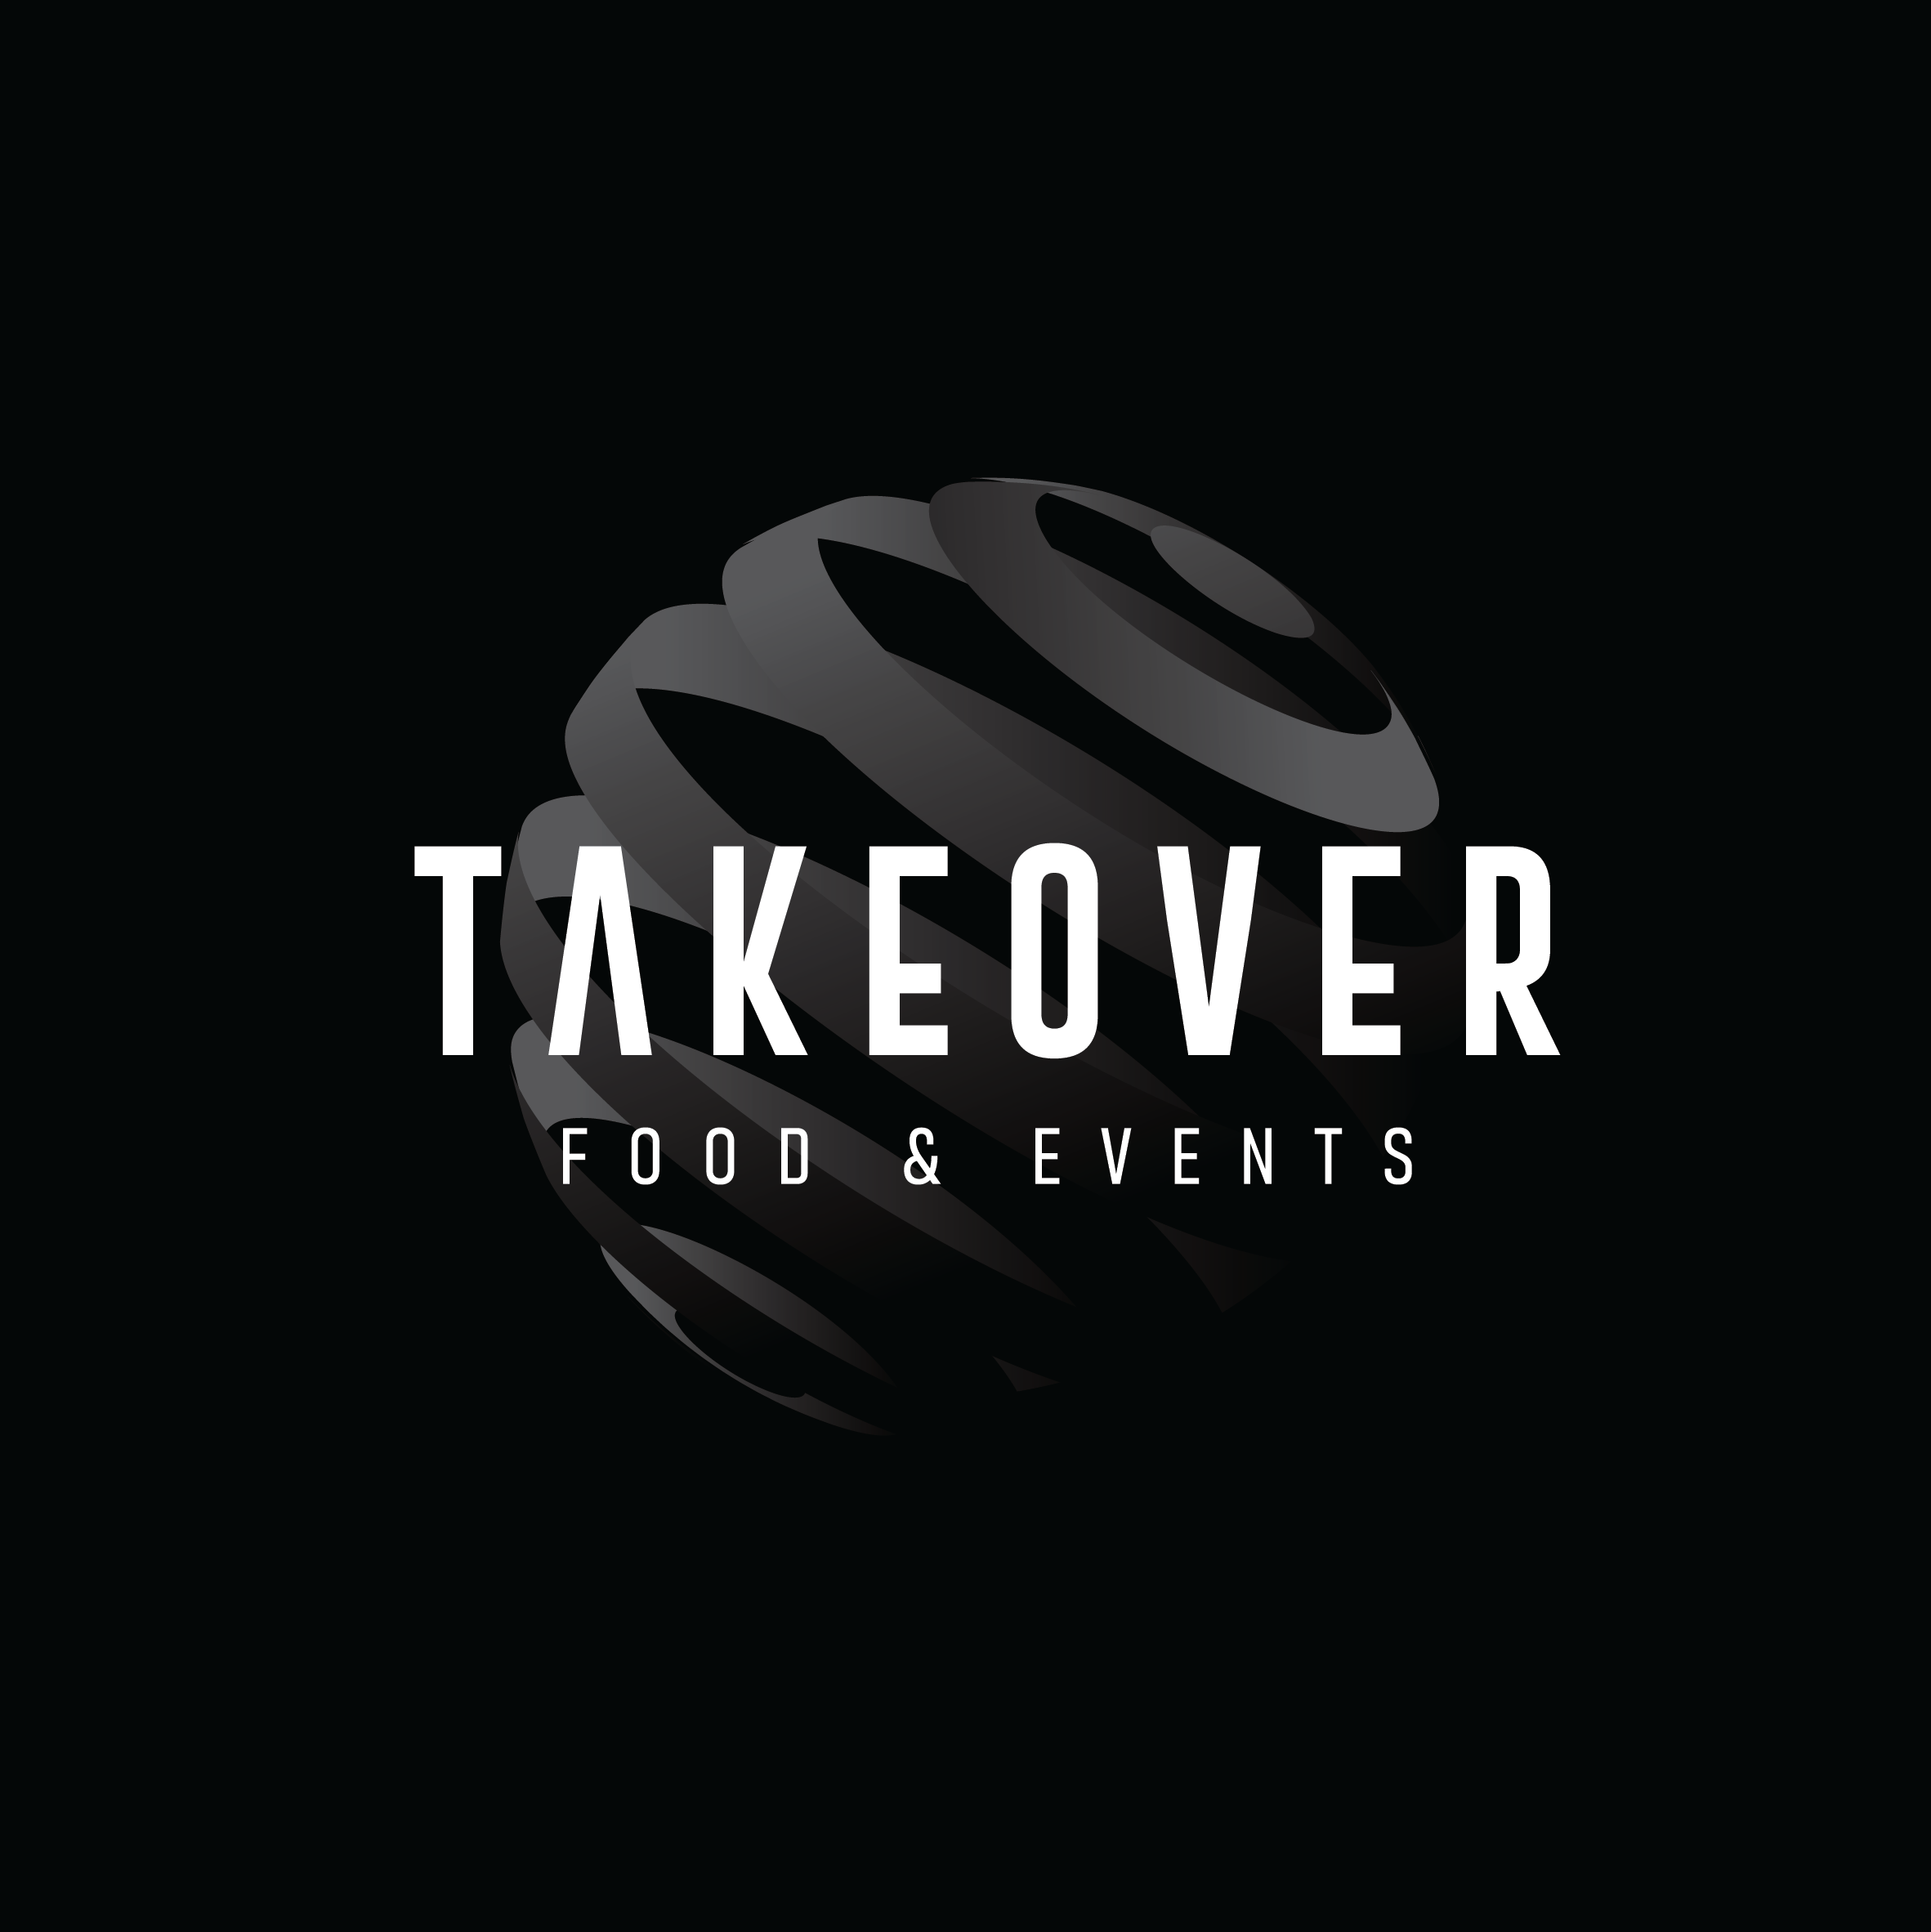 TAKEOVER Food & Events